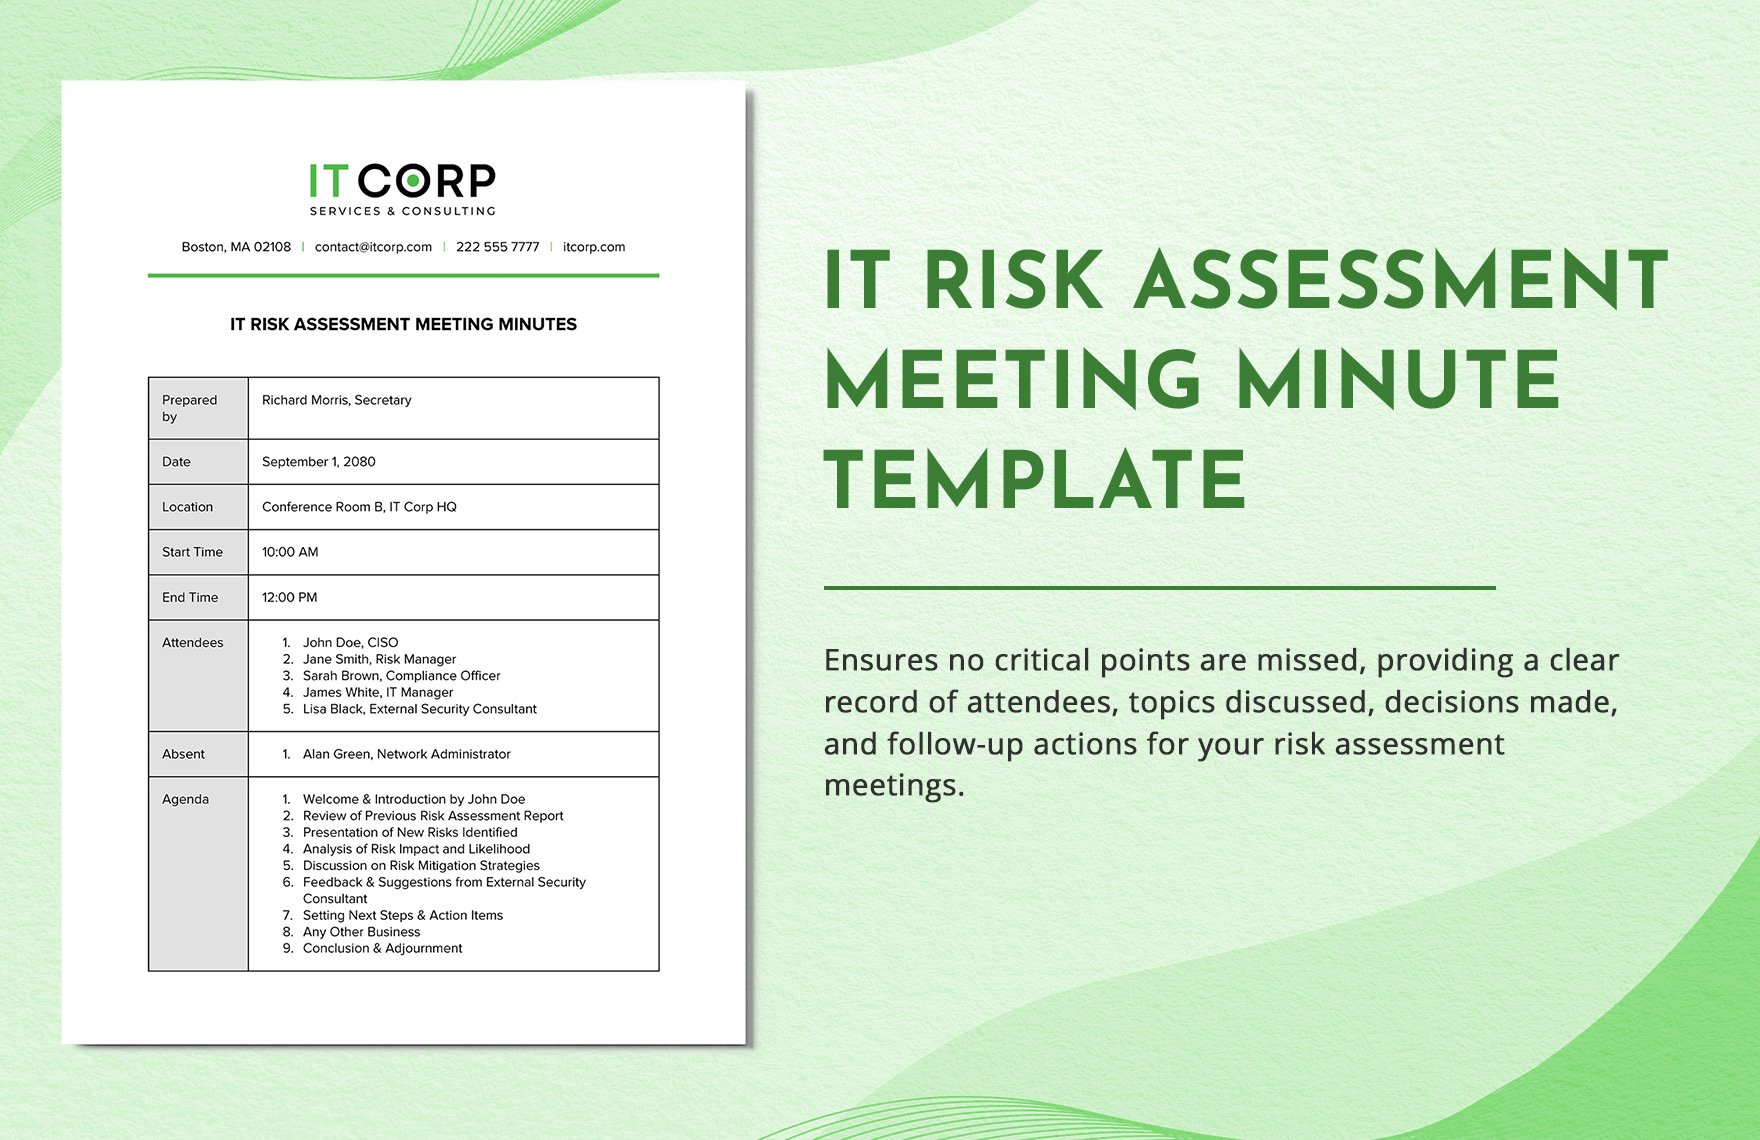 IT Risk Assessment Meeting Minute Template in Word, Google Docs, PDF